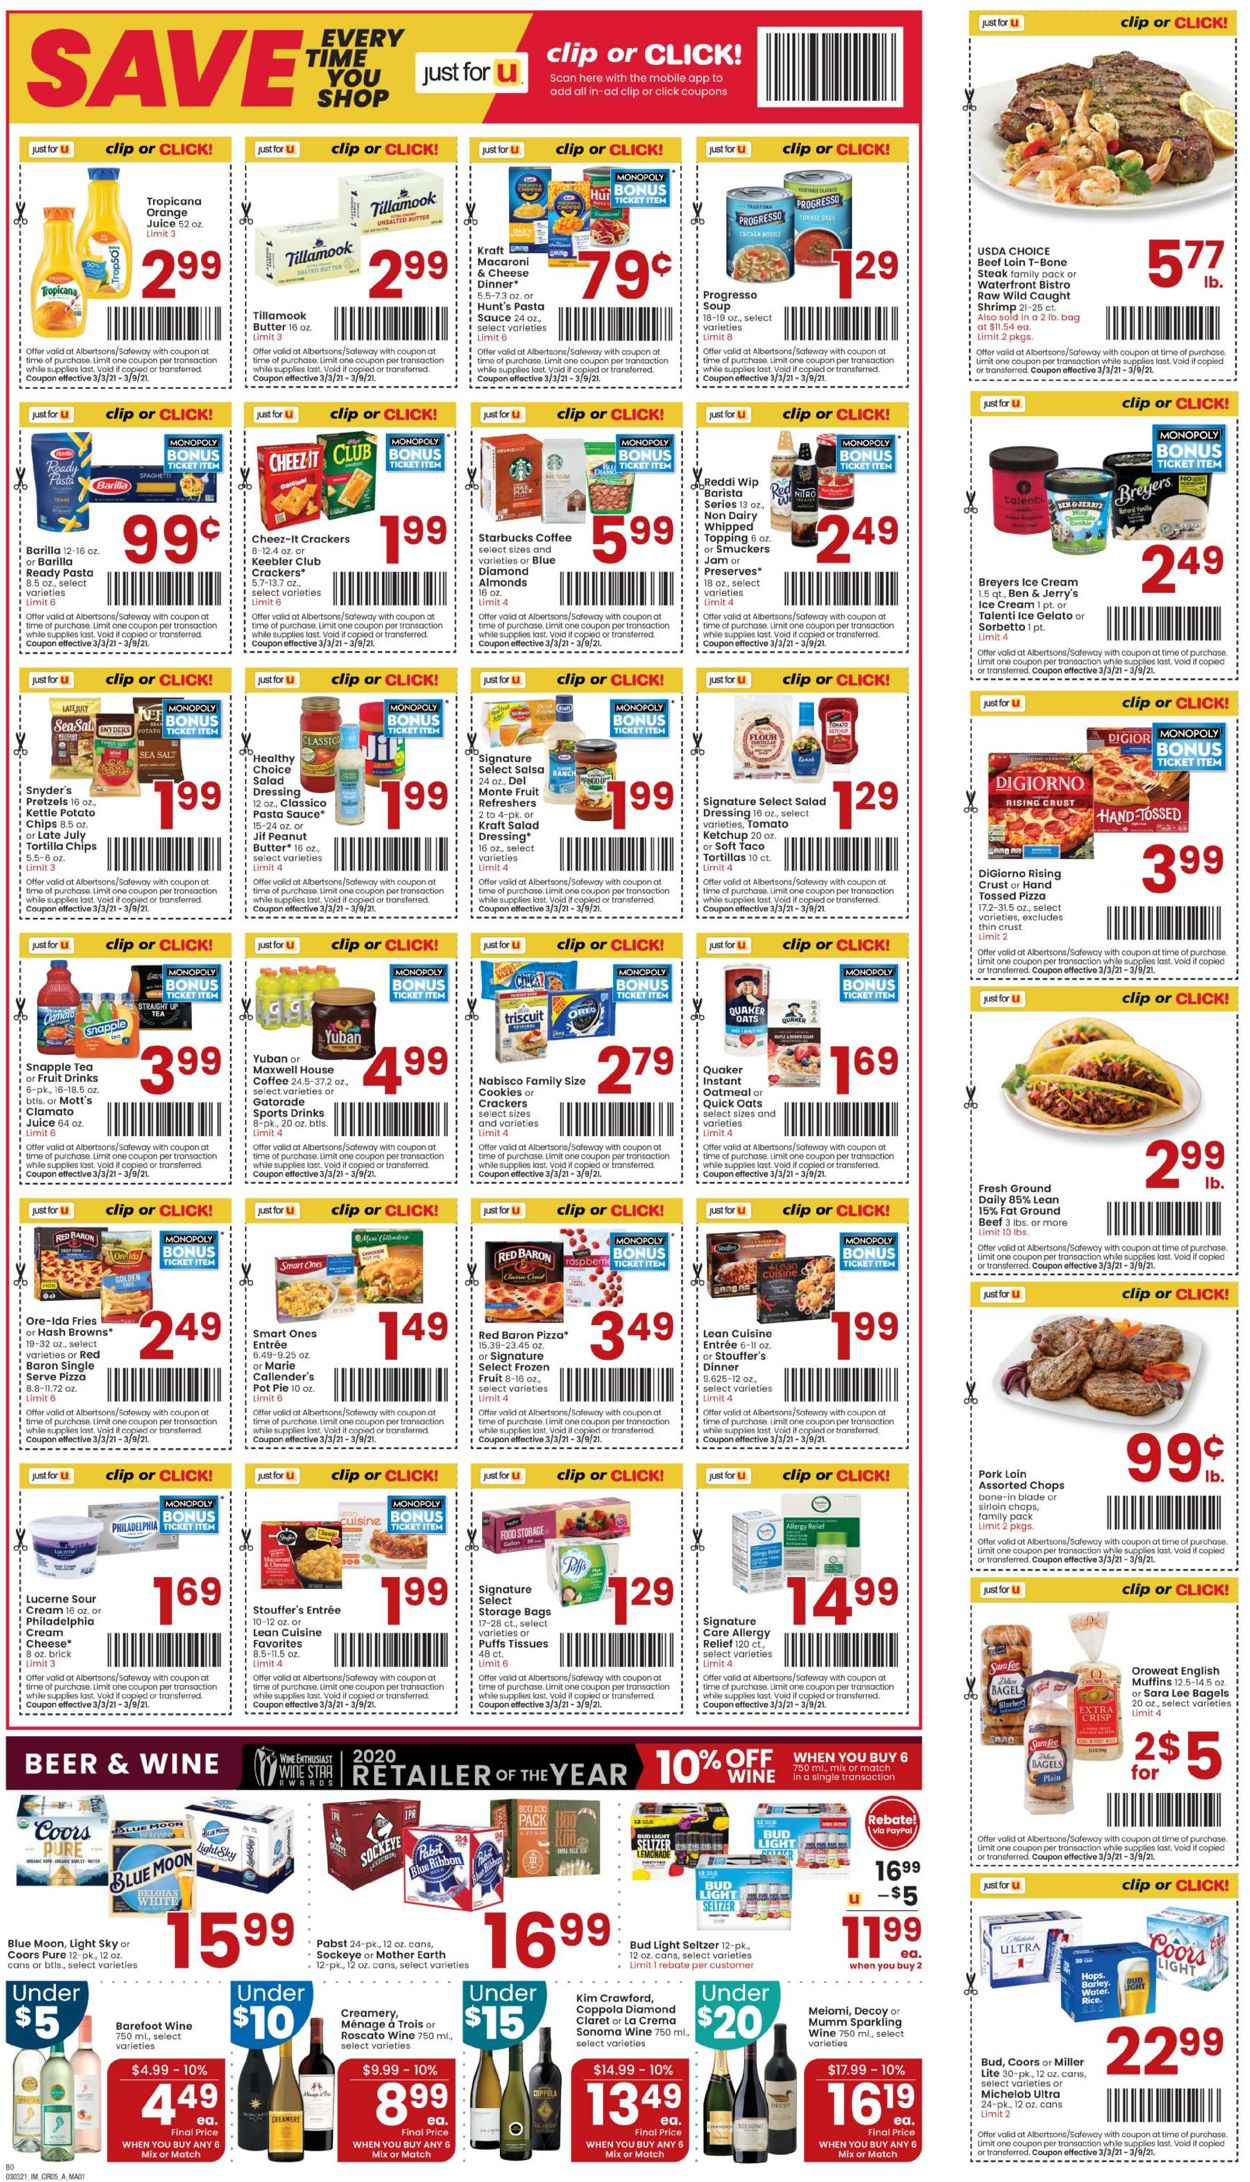 Albertsons Current weekly ad 03/03 - 03/09/2021 [5] - frequent-ads.com